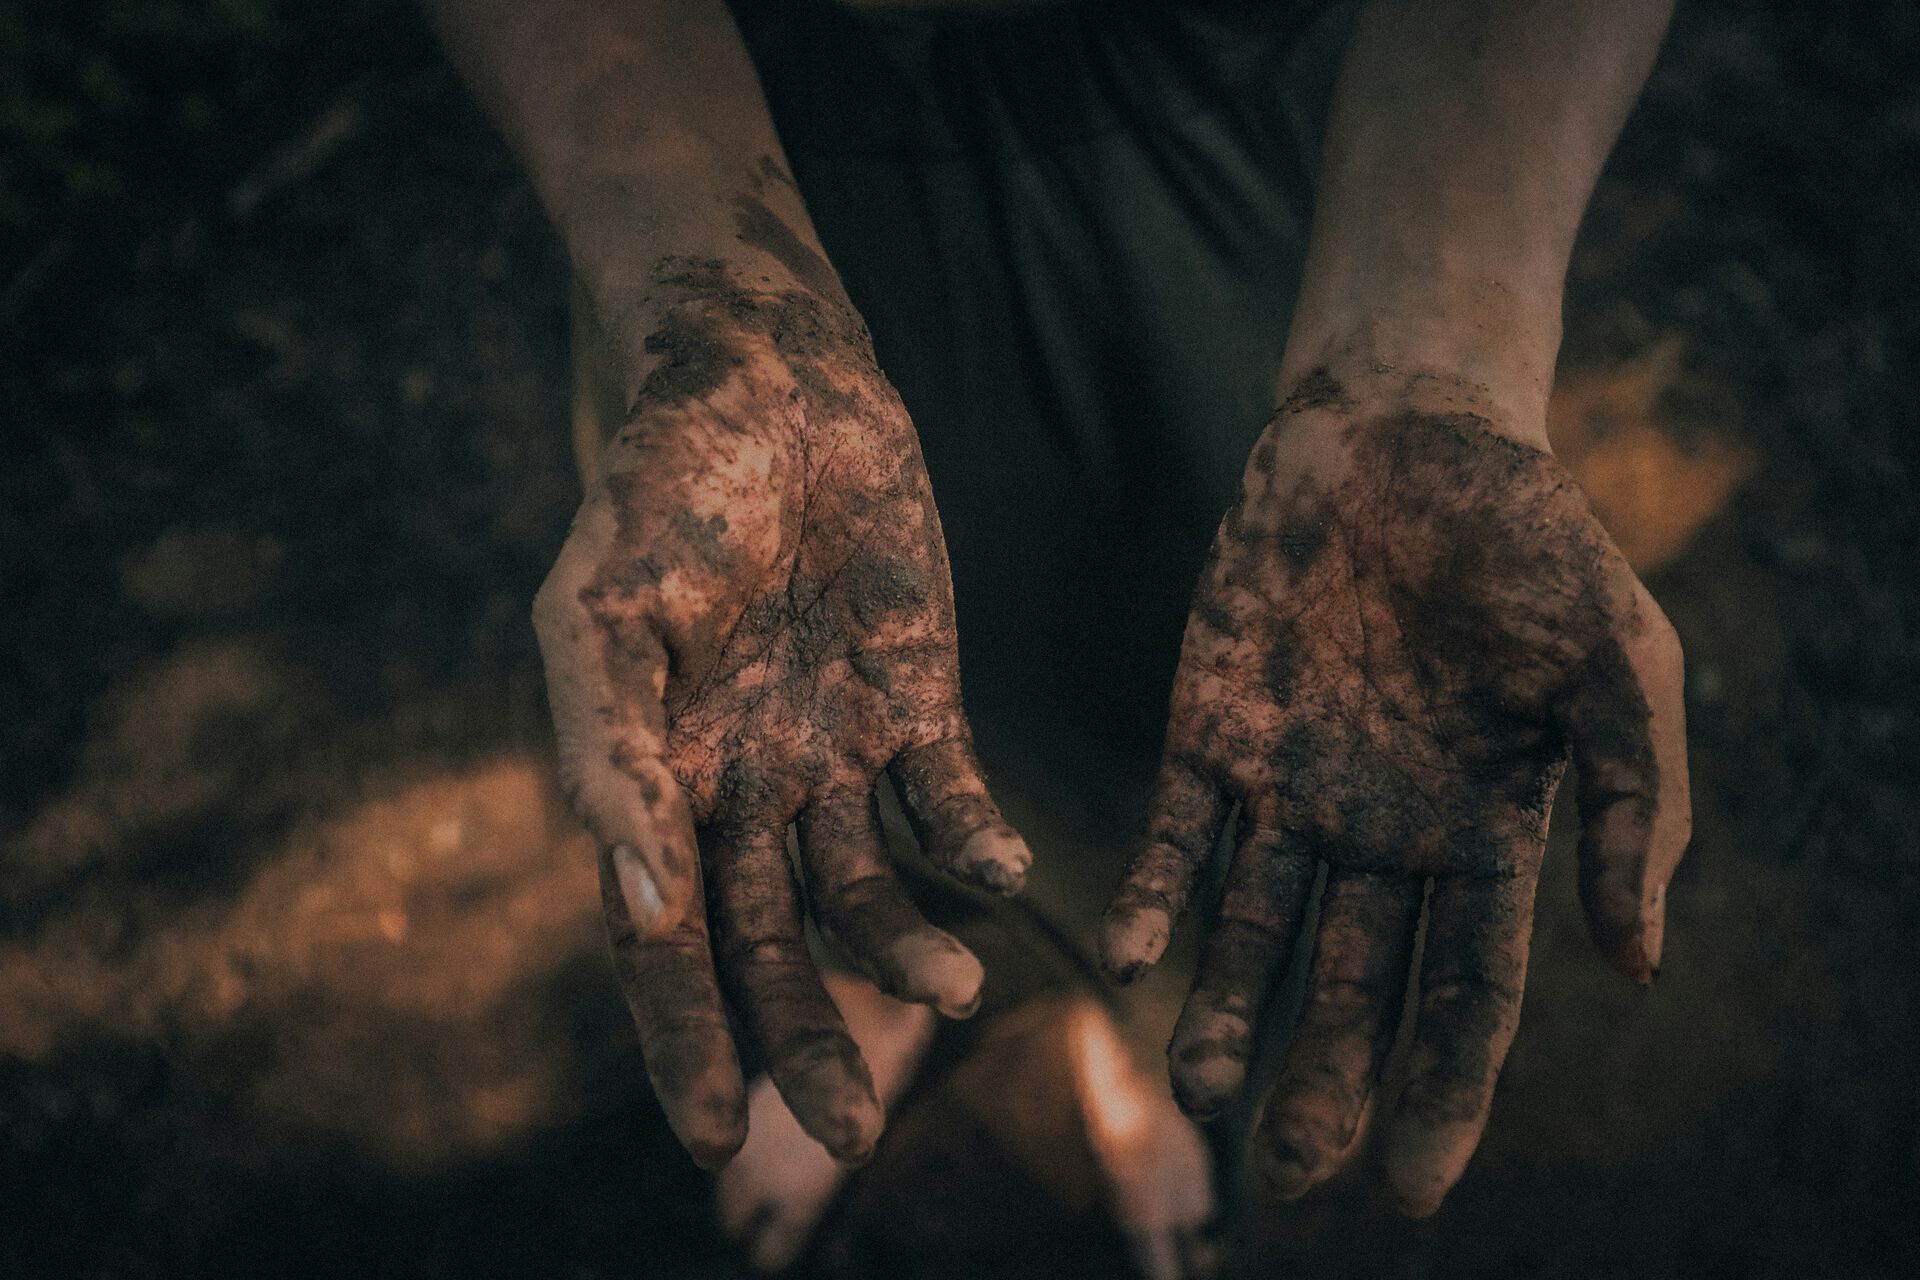 Hands dirty with soil